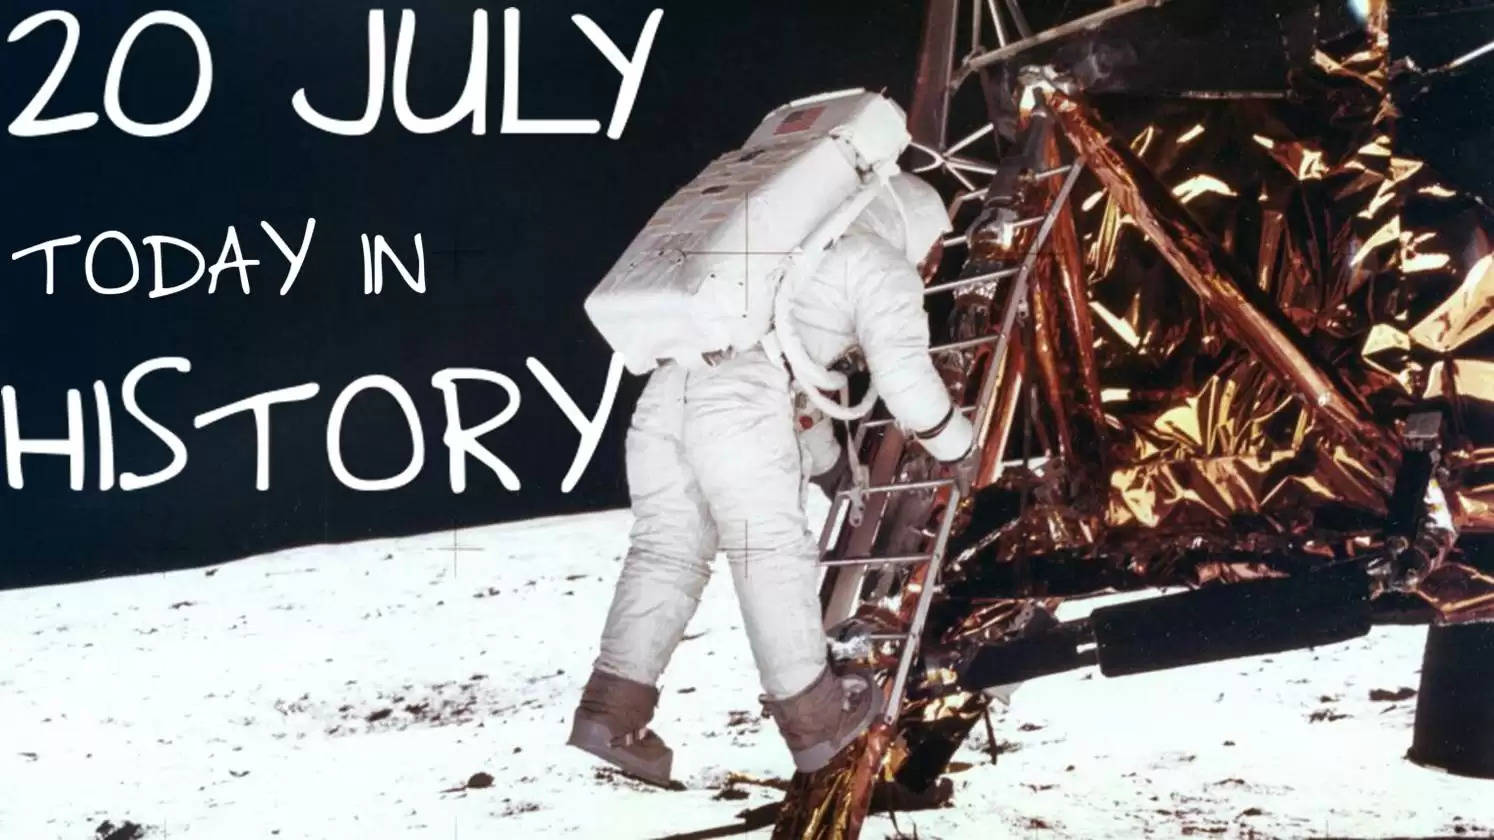 history on 20 july neil armstrong descent on moon bruce lee partition of bengal